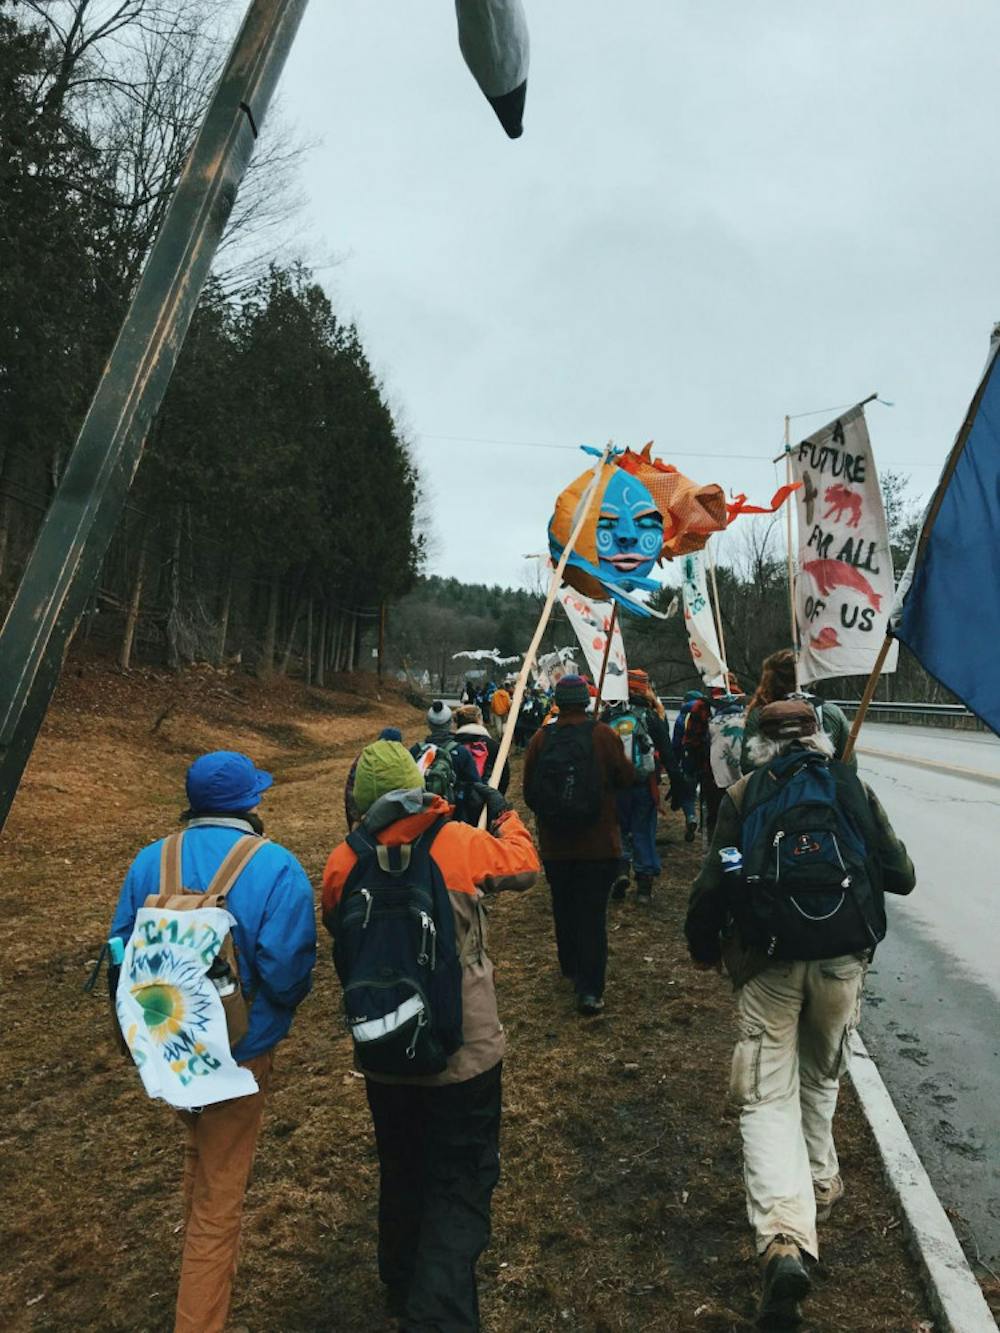 <span class="photocreditinline">Divya Gudur</span><br />Protesters wave flags as they march towards the Statehouse in Montpelier to raise climate awareness.